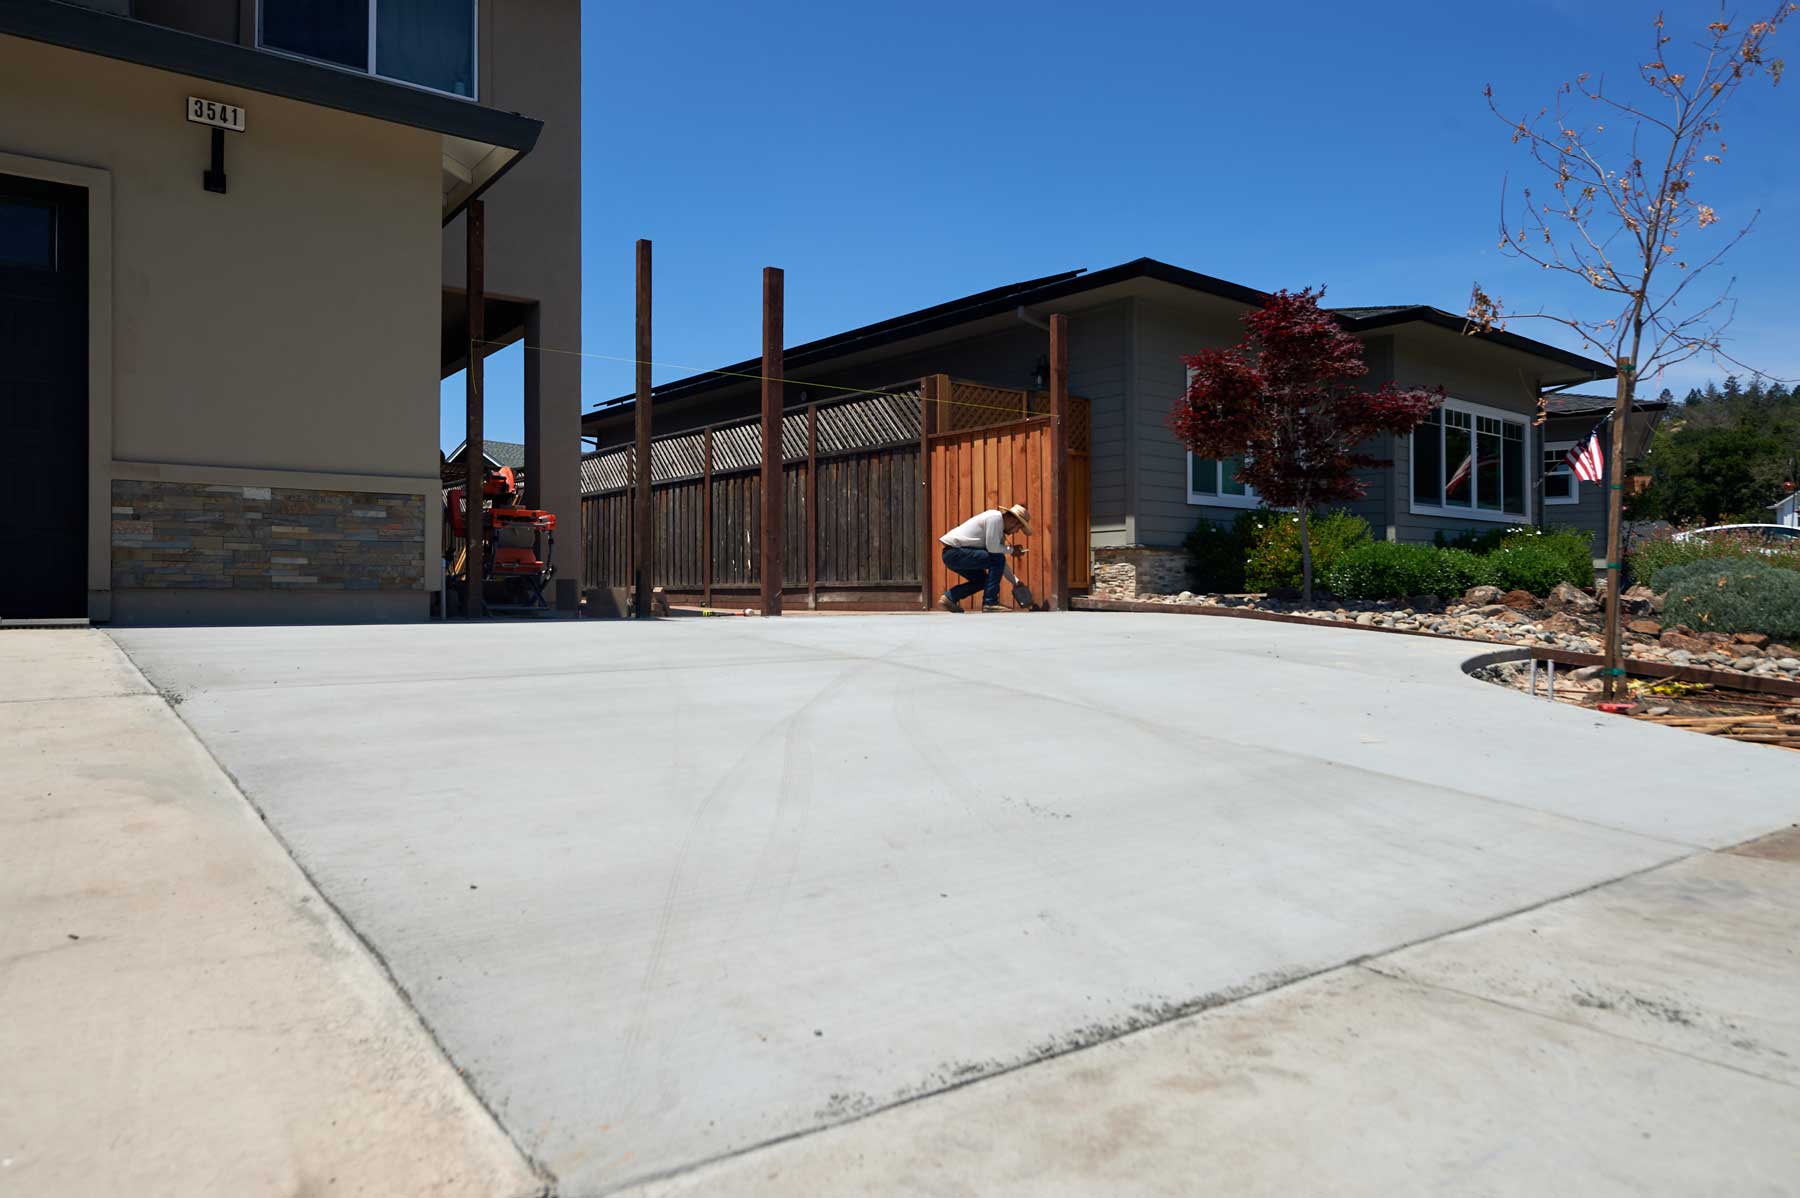 Concrete Landscaping Contractor in Sonoma County CA | Northview Landscaping